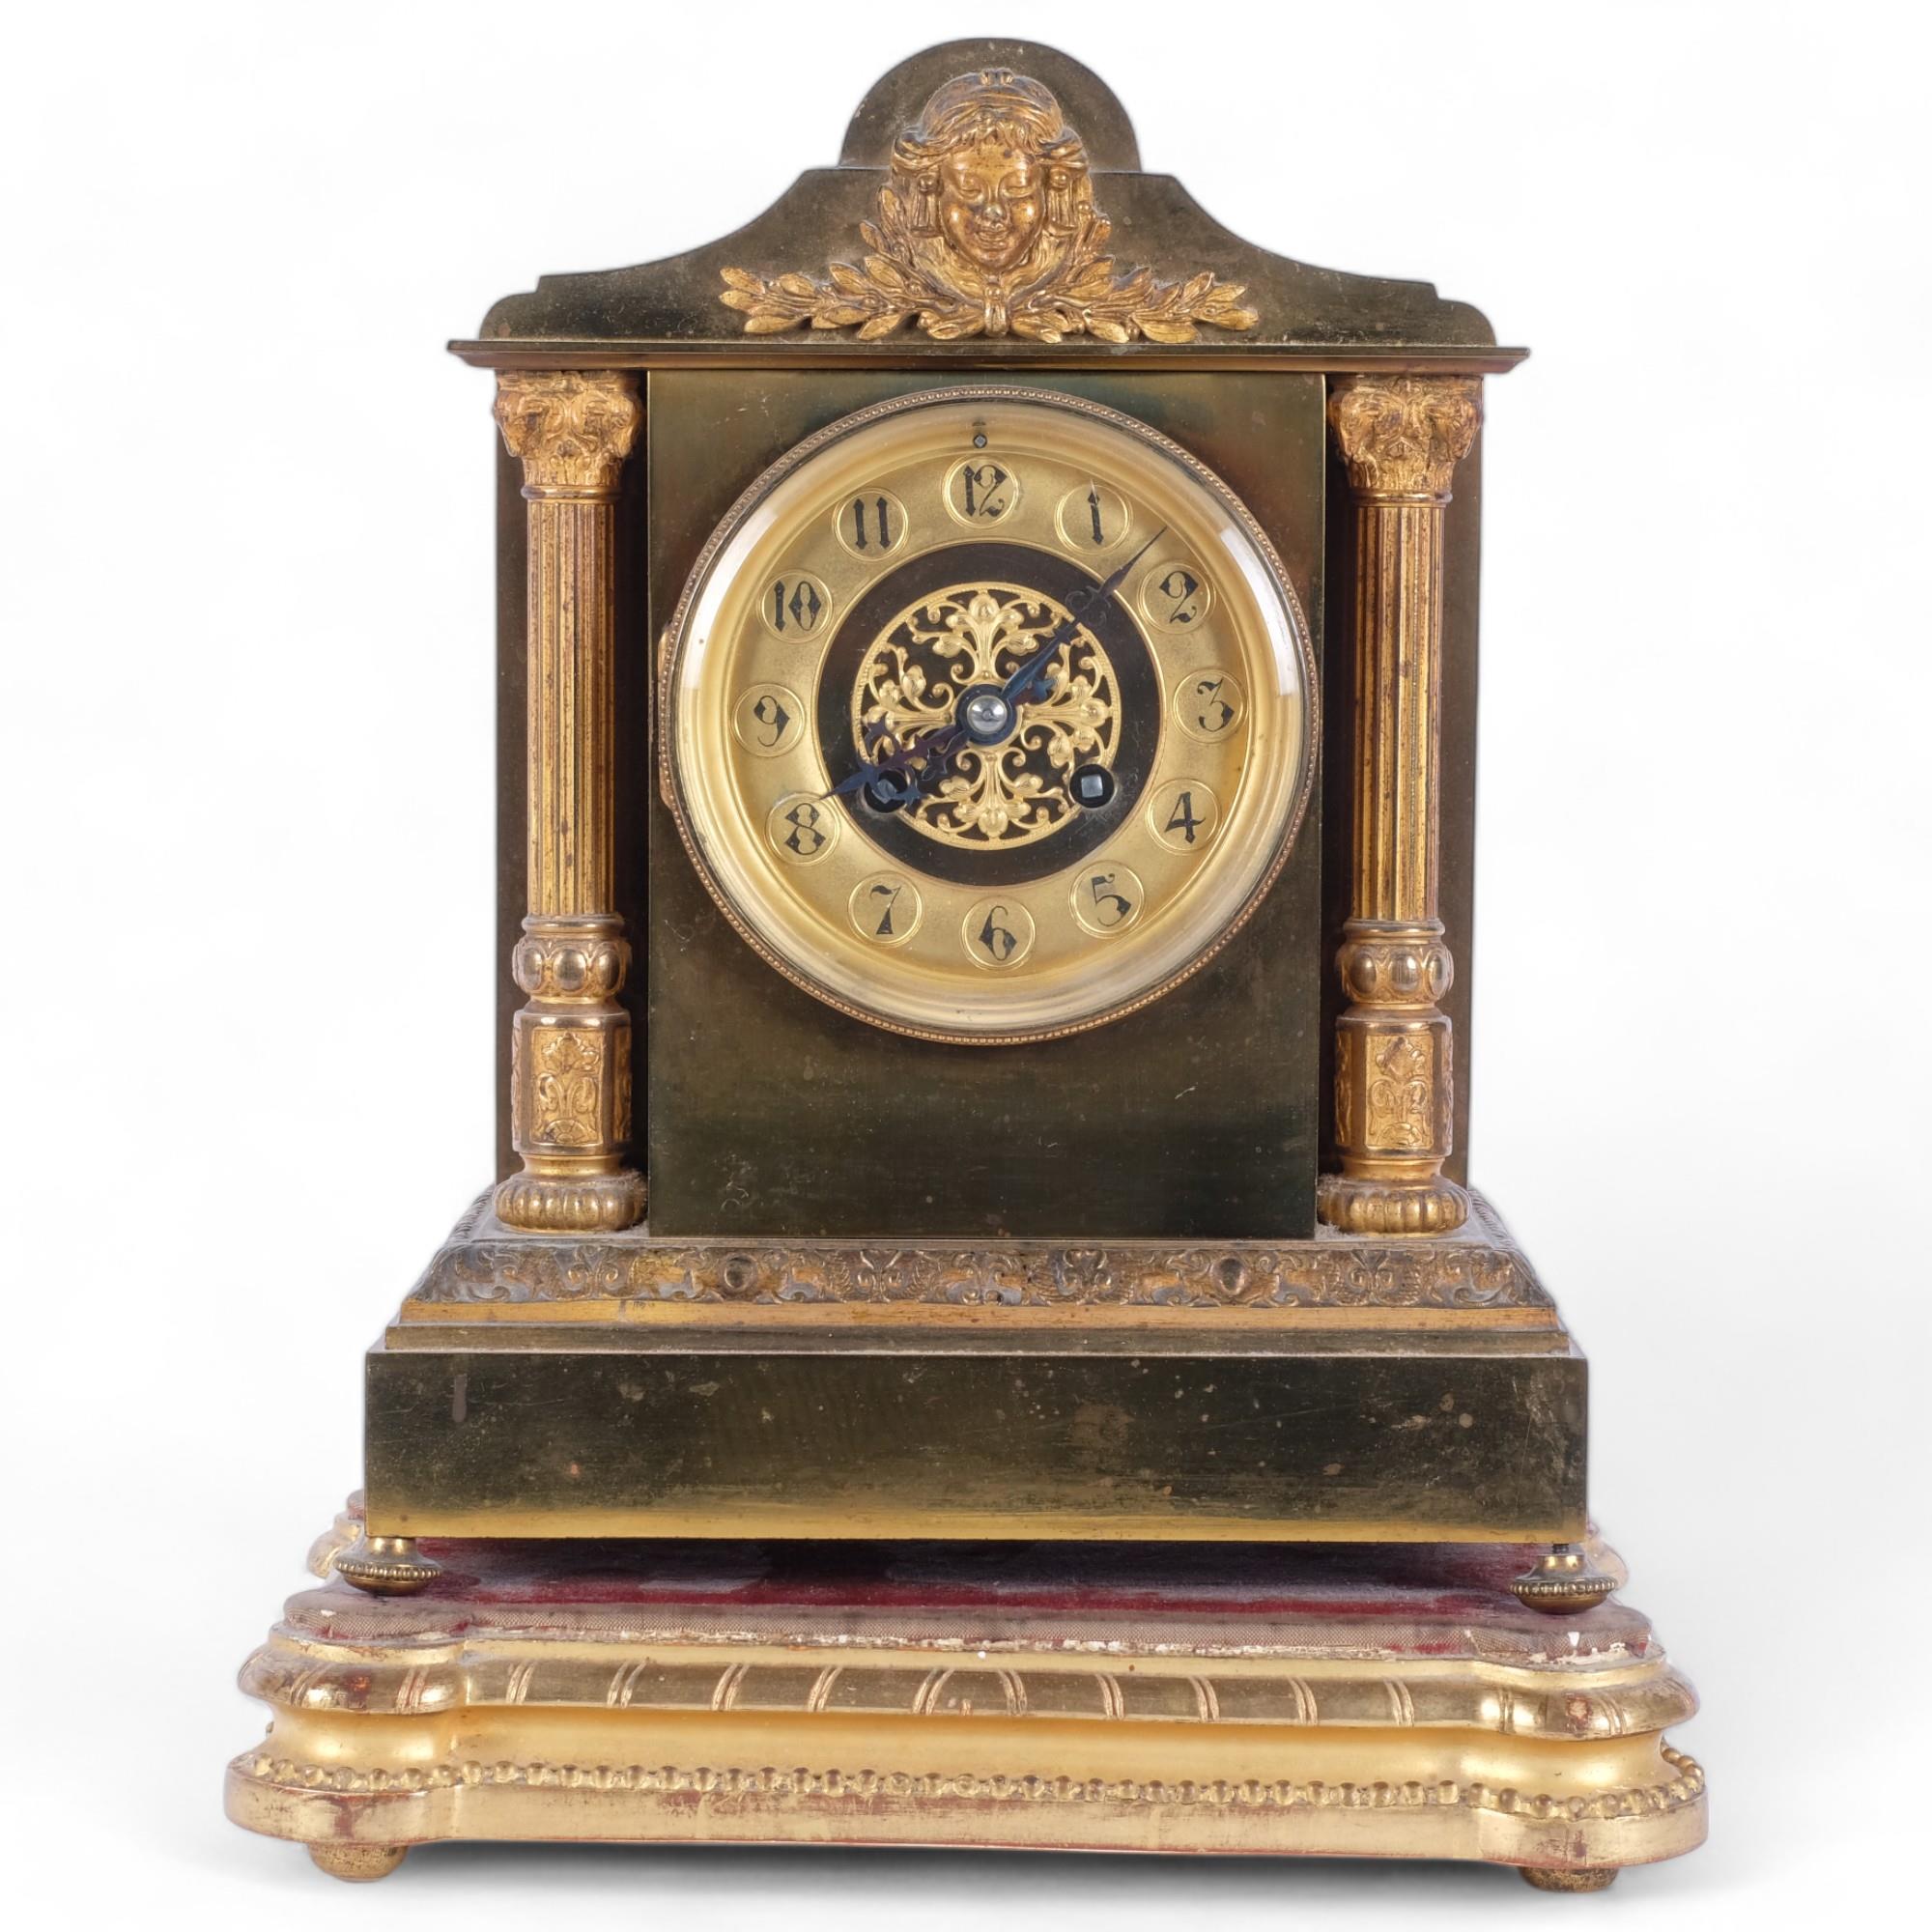 A 19th century French gilt-metal mantel clock of architectural form, 8-day striking movement,